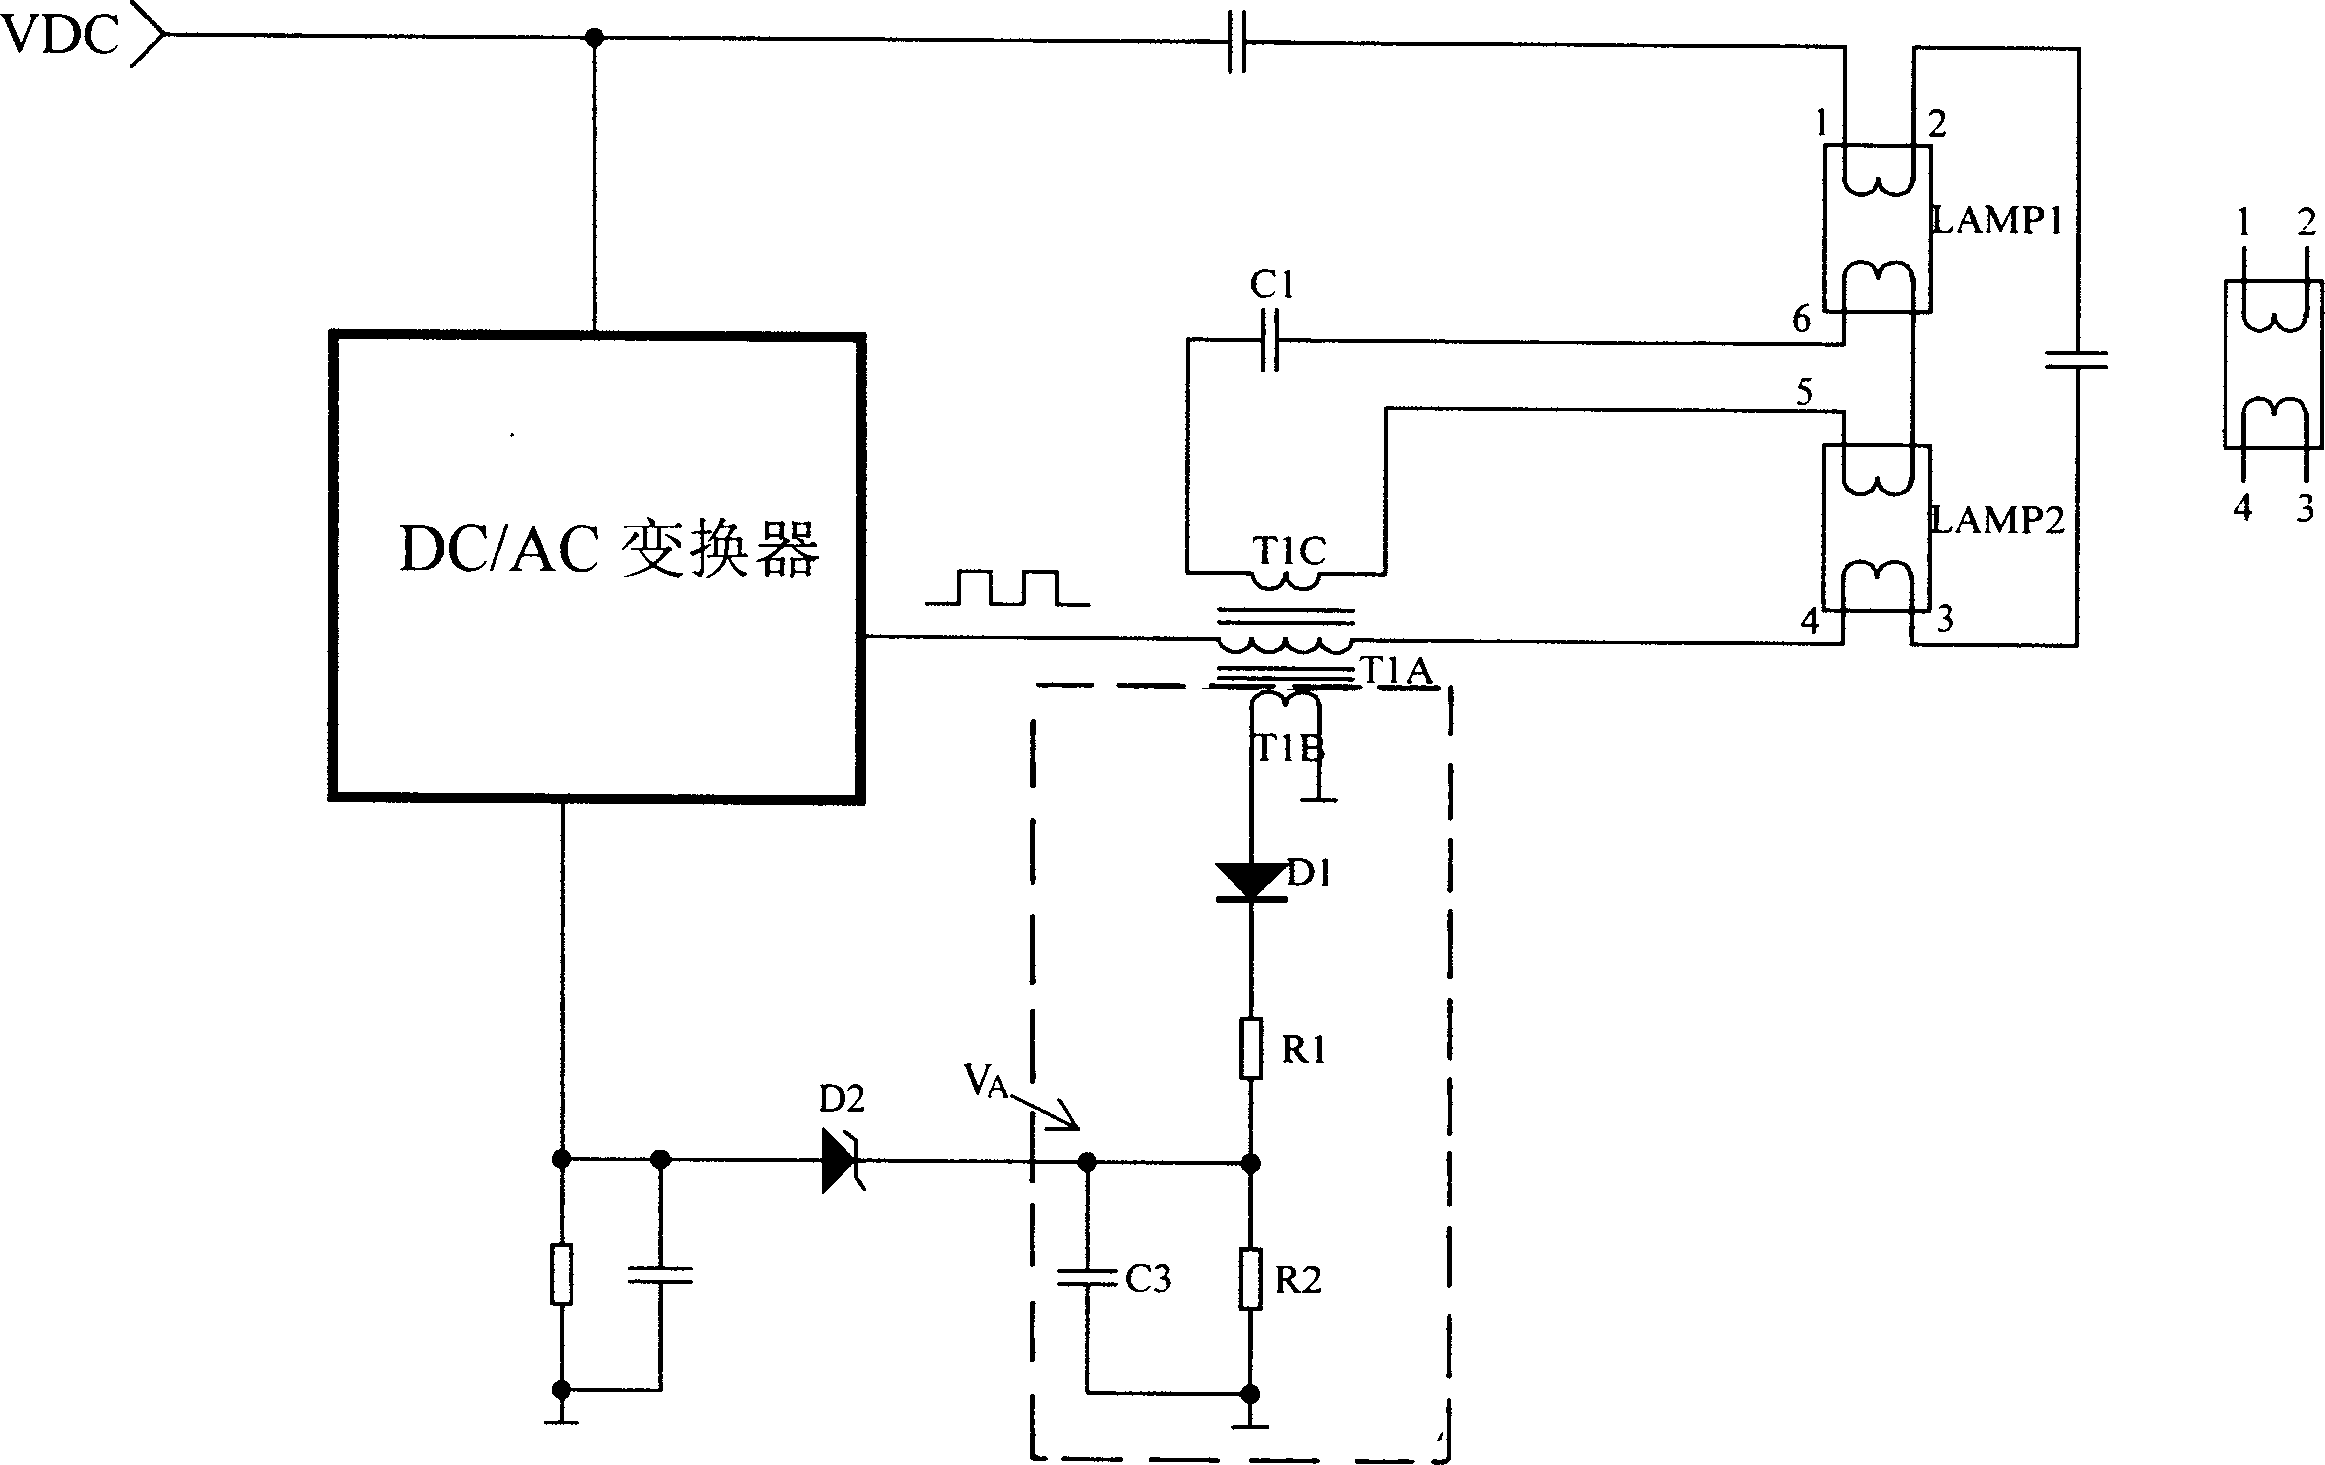 Automatic detecting and compensating circuit for single and double lamps